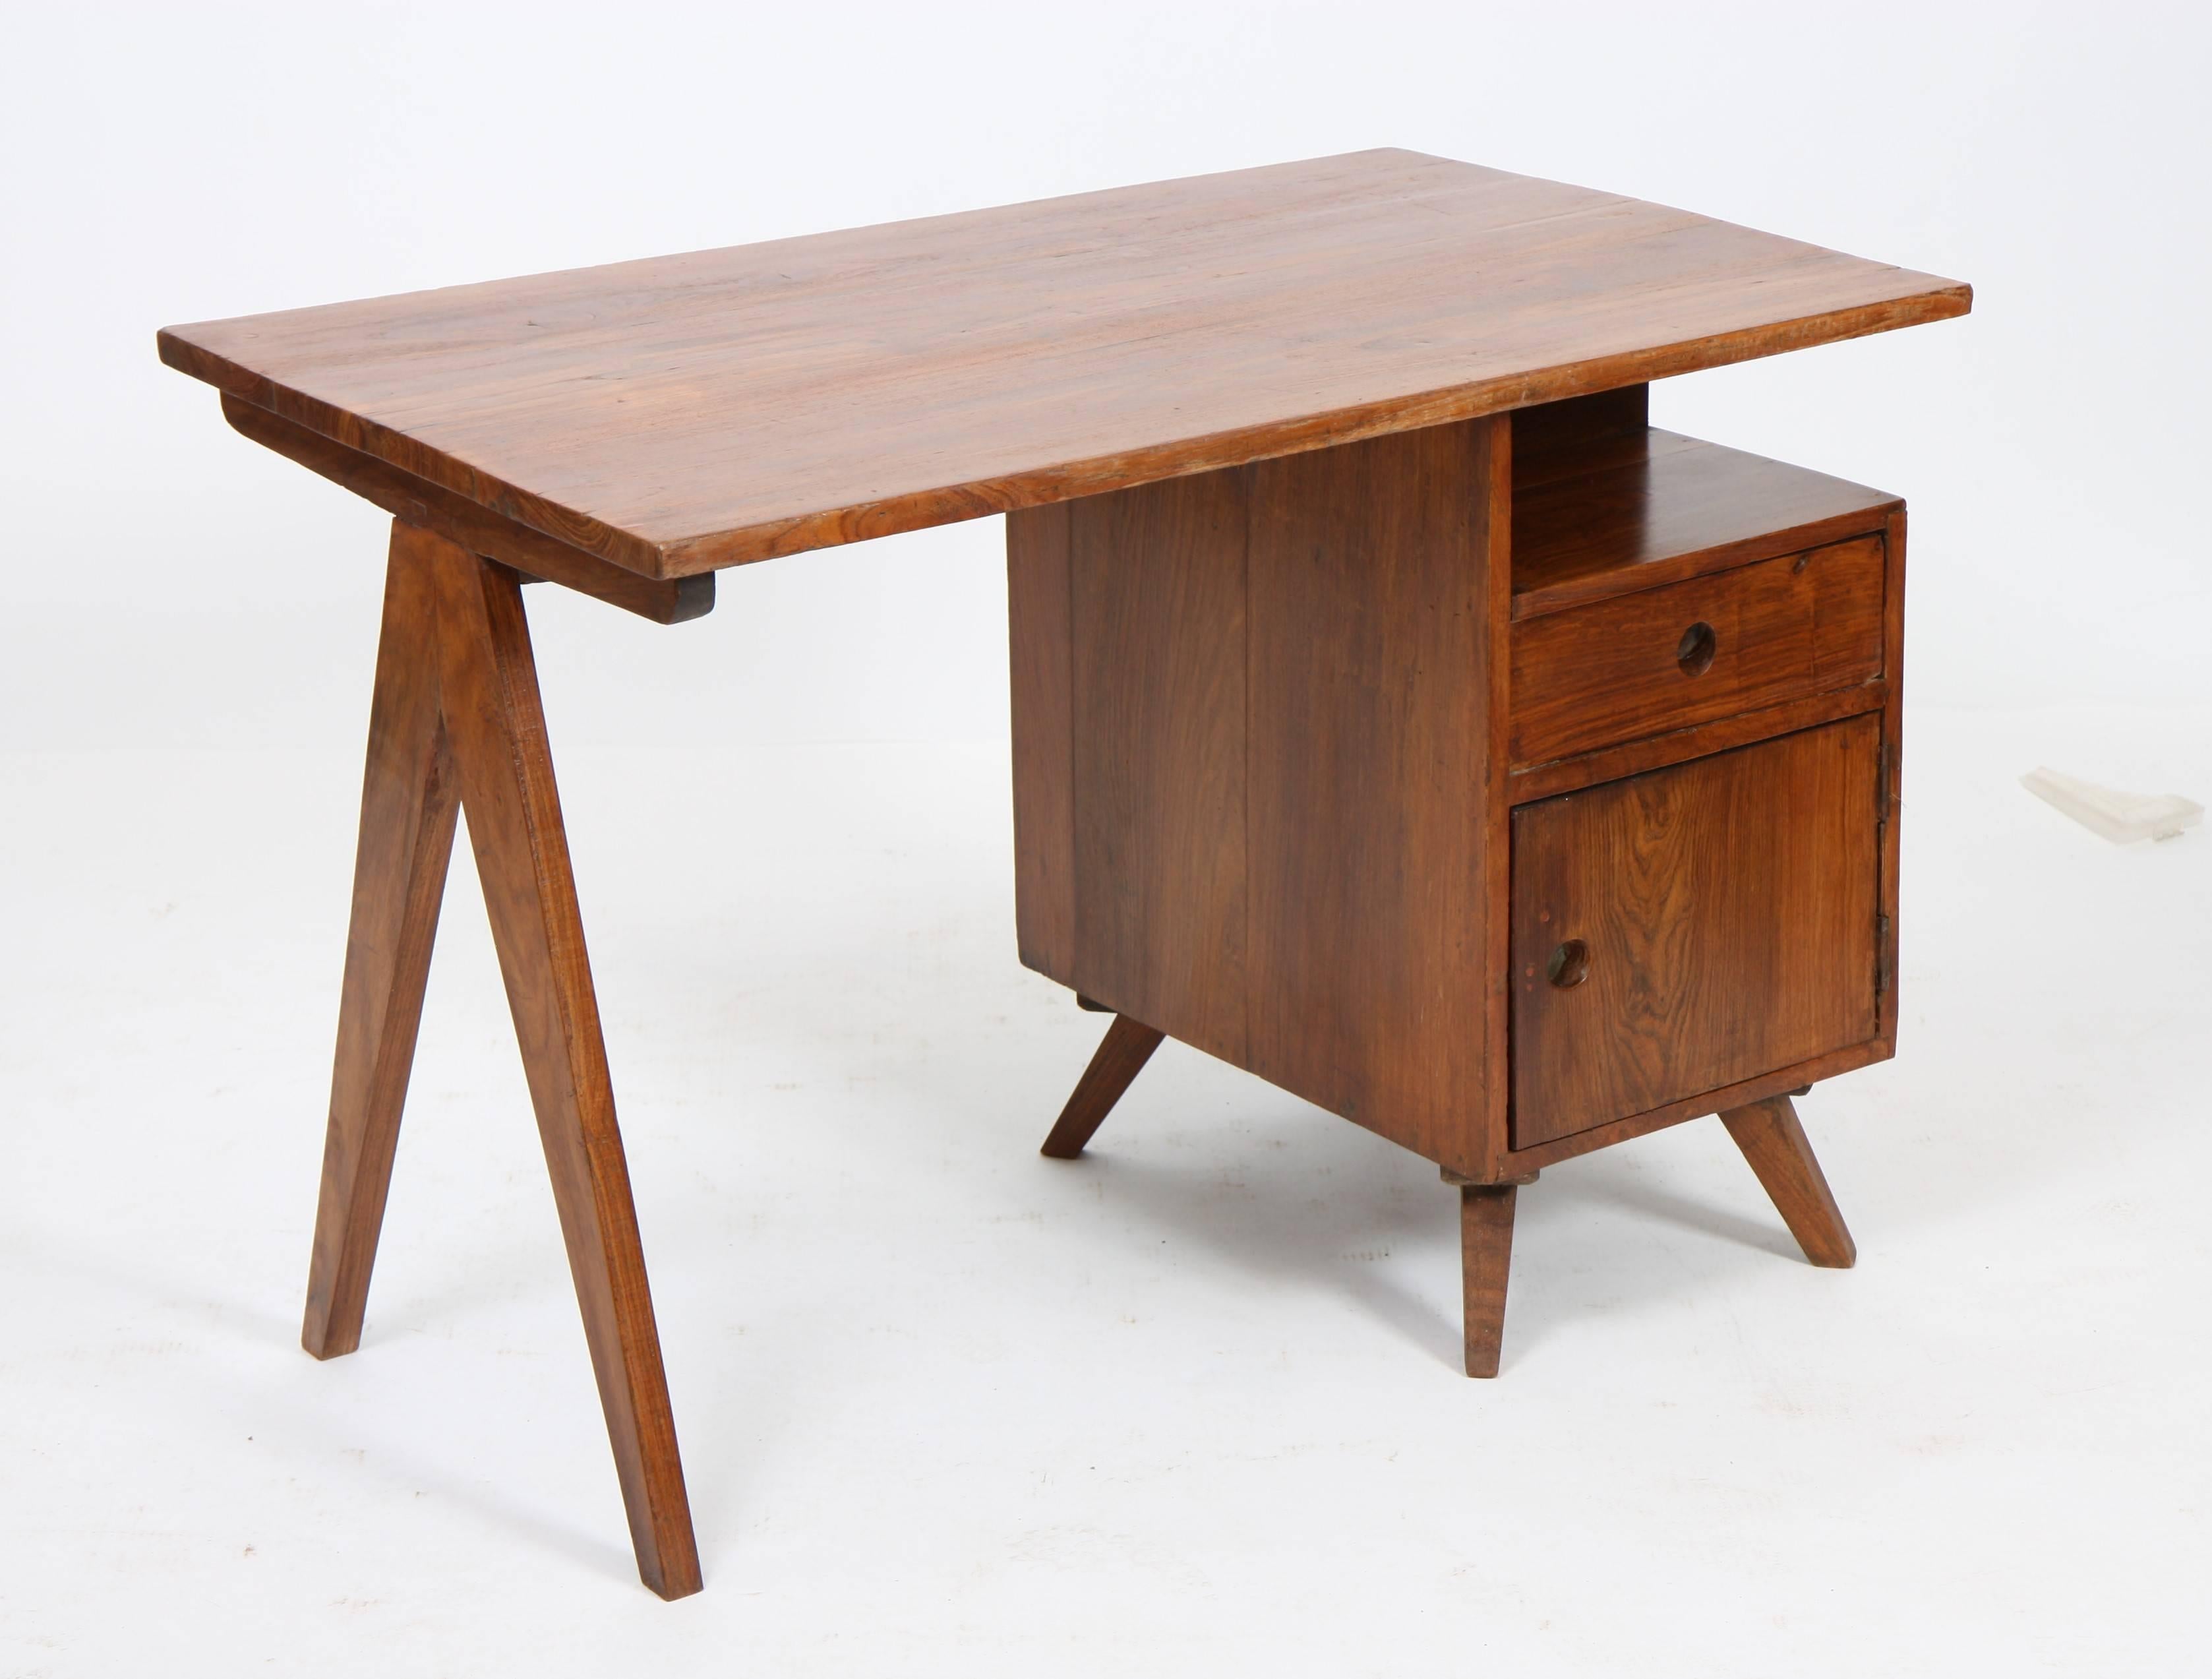 Pierre Jeanneret (1896-1967).
Small administrative desk, solid teak, tray mounted on "V" leg on a trunk opening with a door and a drawer on the opposite side,
circa 1960.
Measures: Height 69 cm; length 99 cm; depth 61 cm.
Provenance: